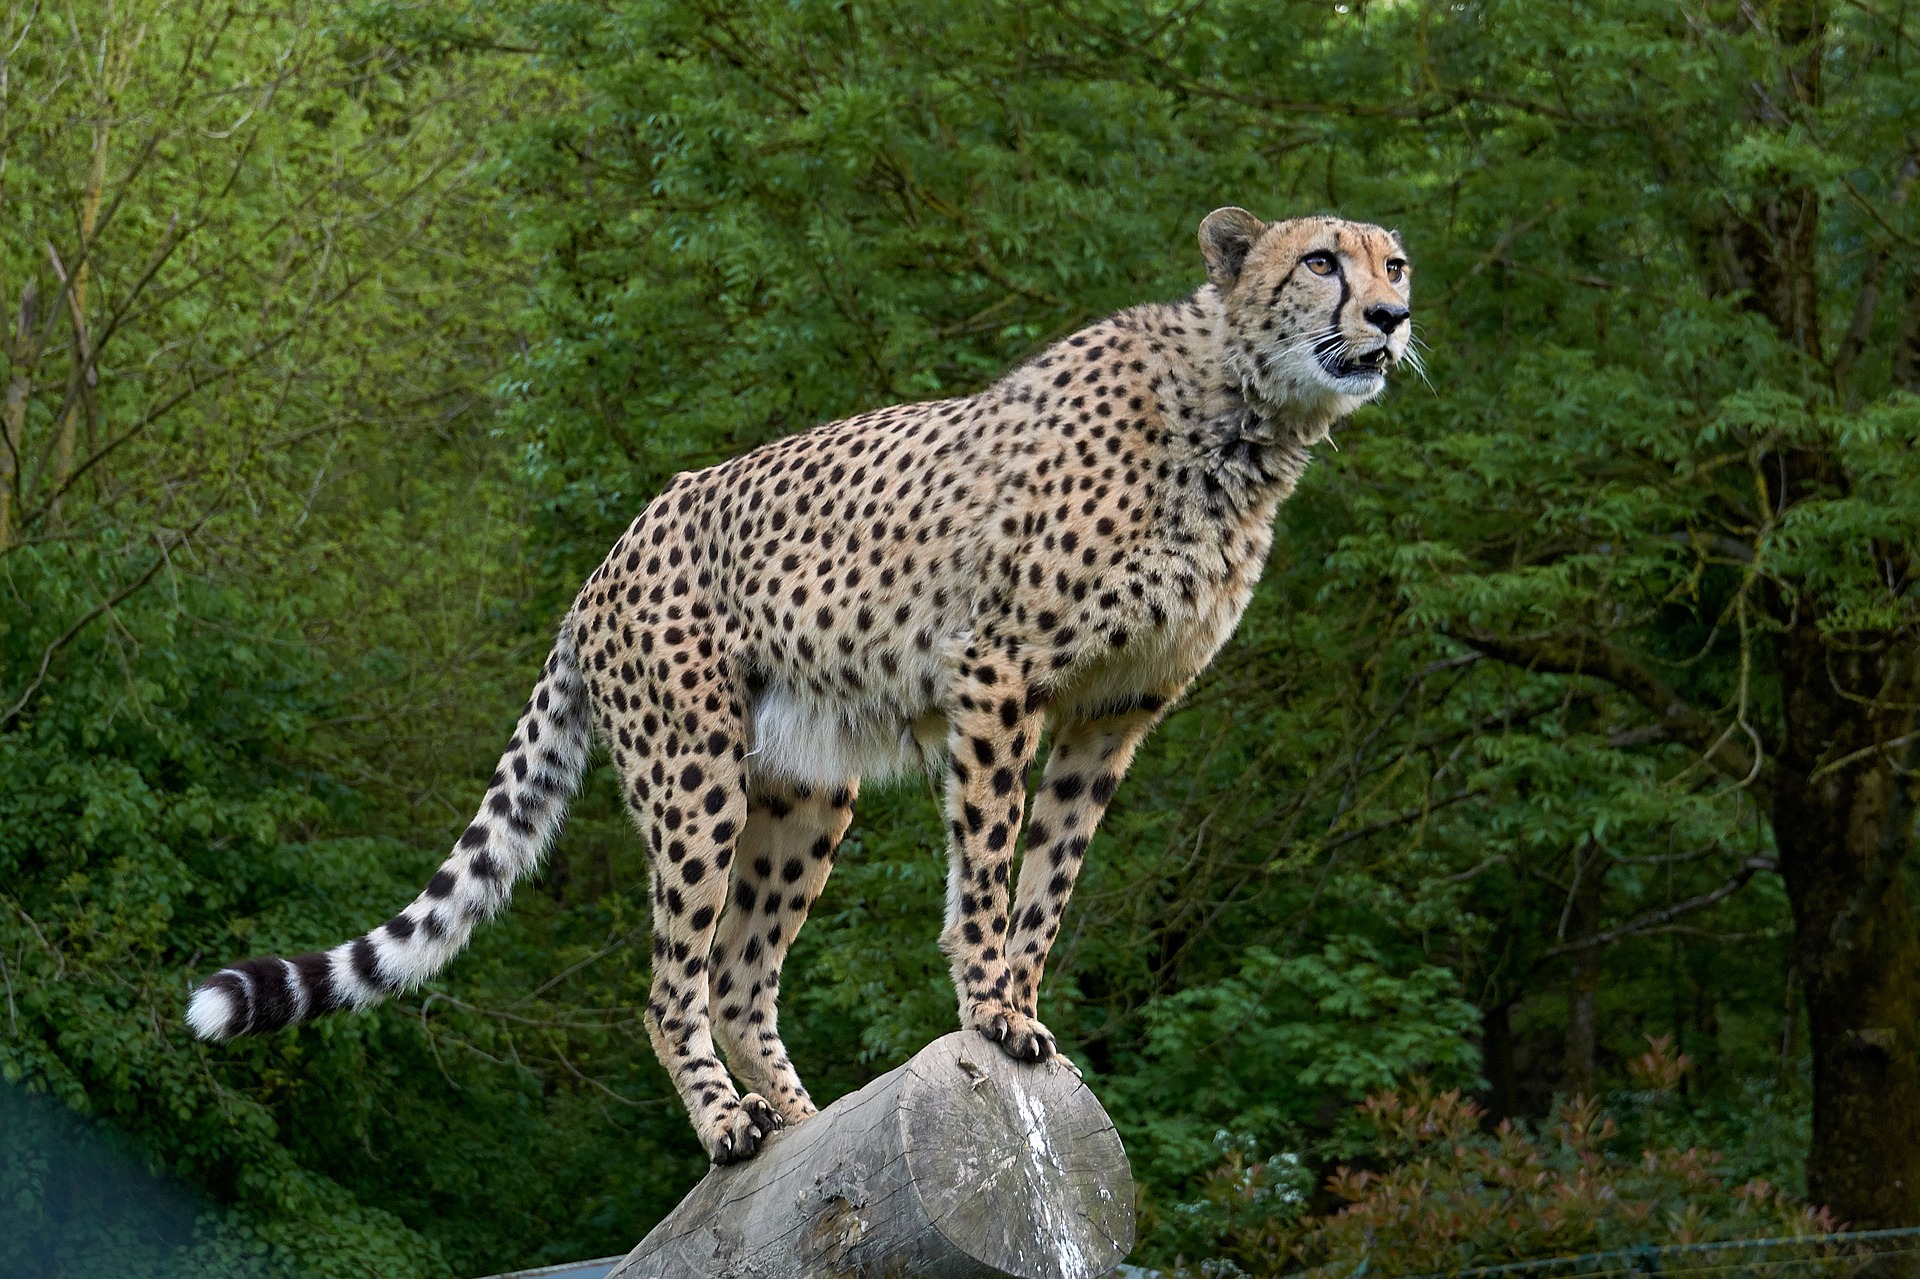 India Proceeds With Plan To Bring Cheetahs Back, but Experts Brace for Bad News